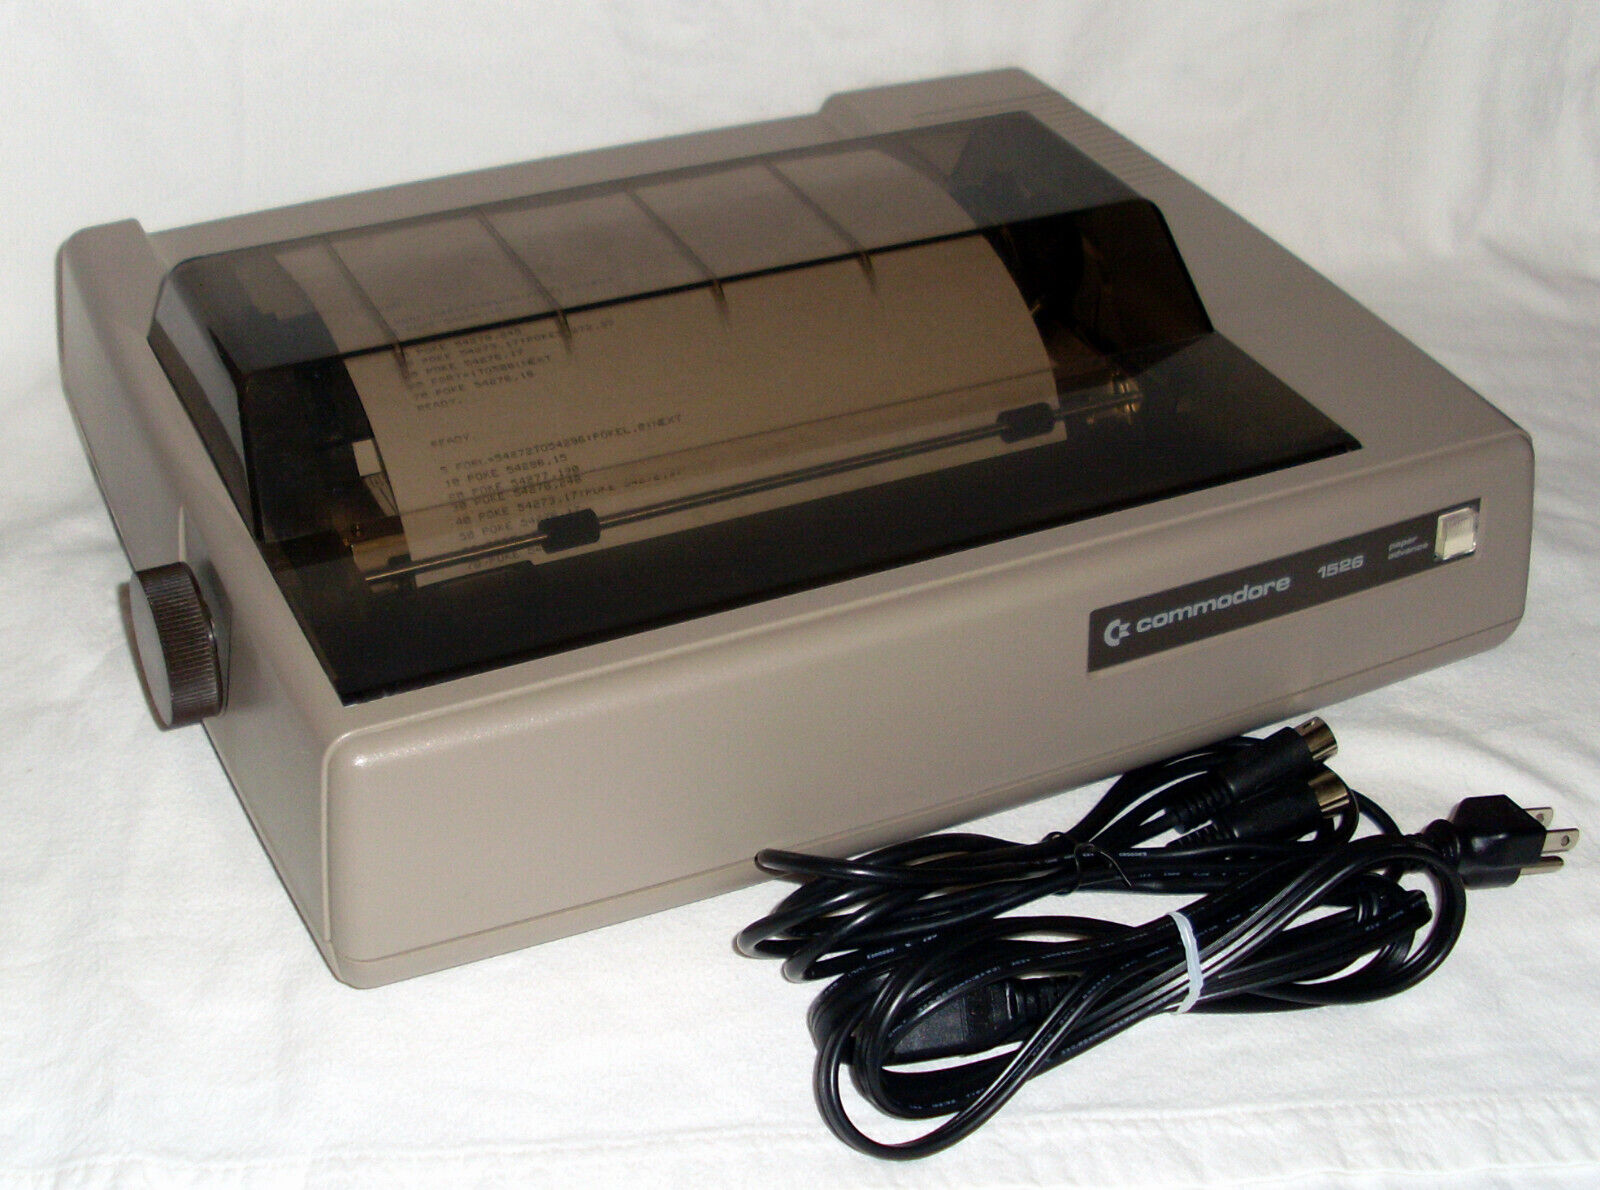 Vintage Commodore 1526 Printer With Cables - Nice Condition & Works